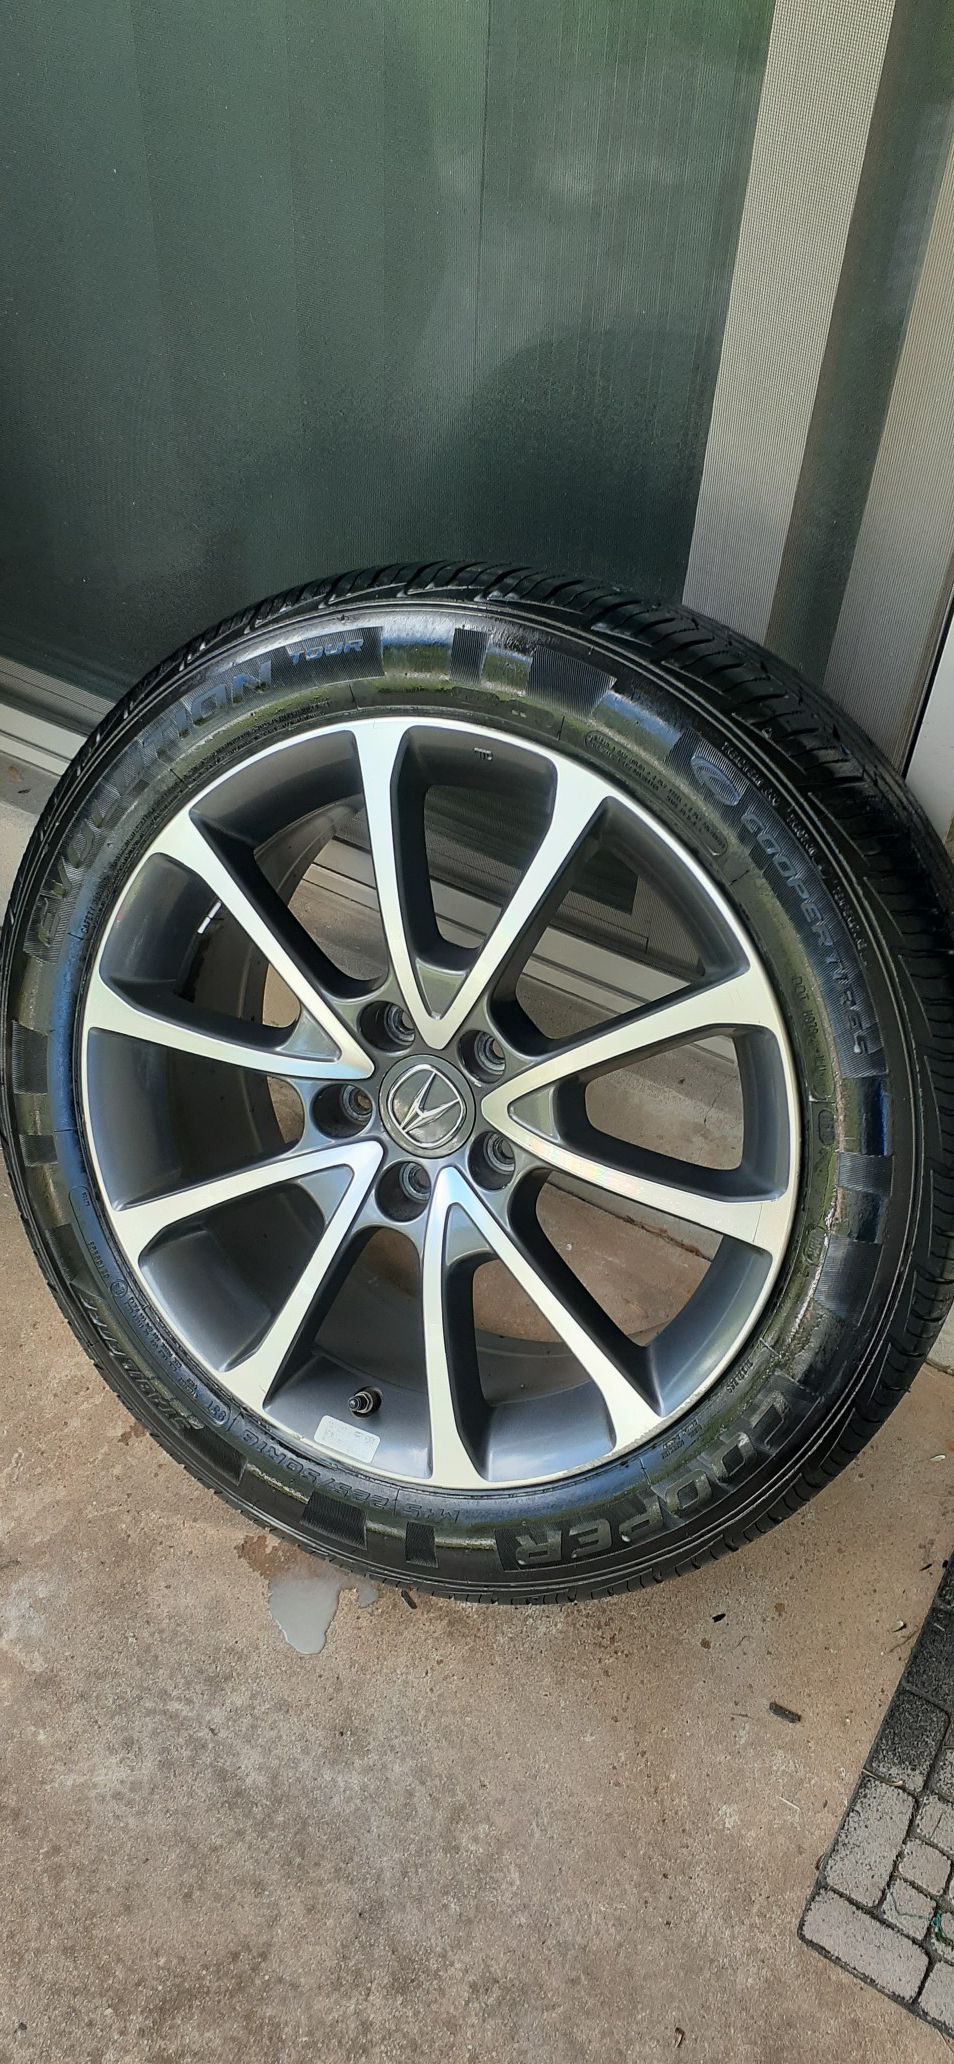 Acura rims and tires,#18